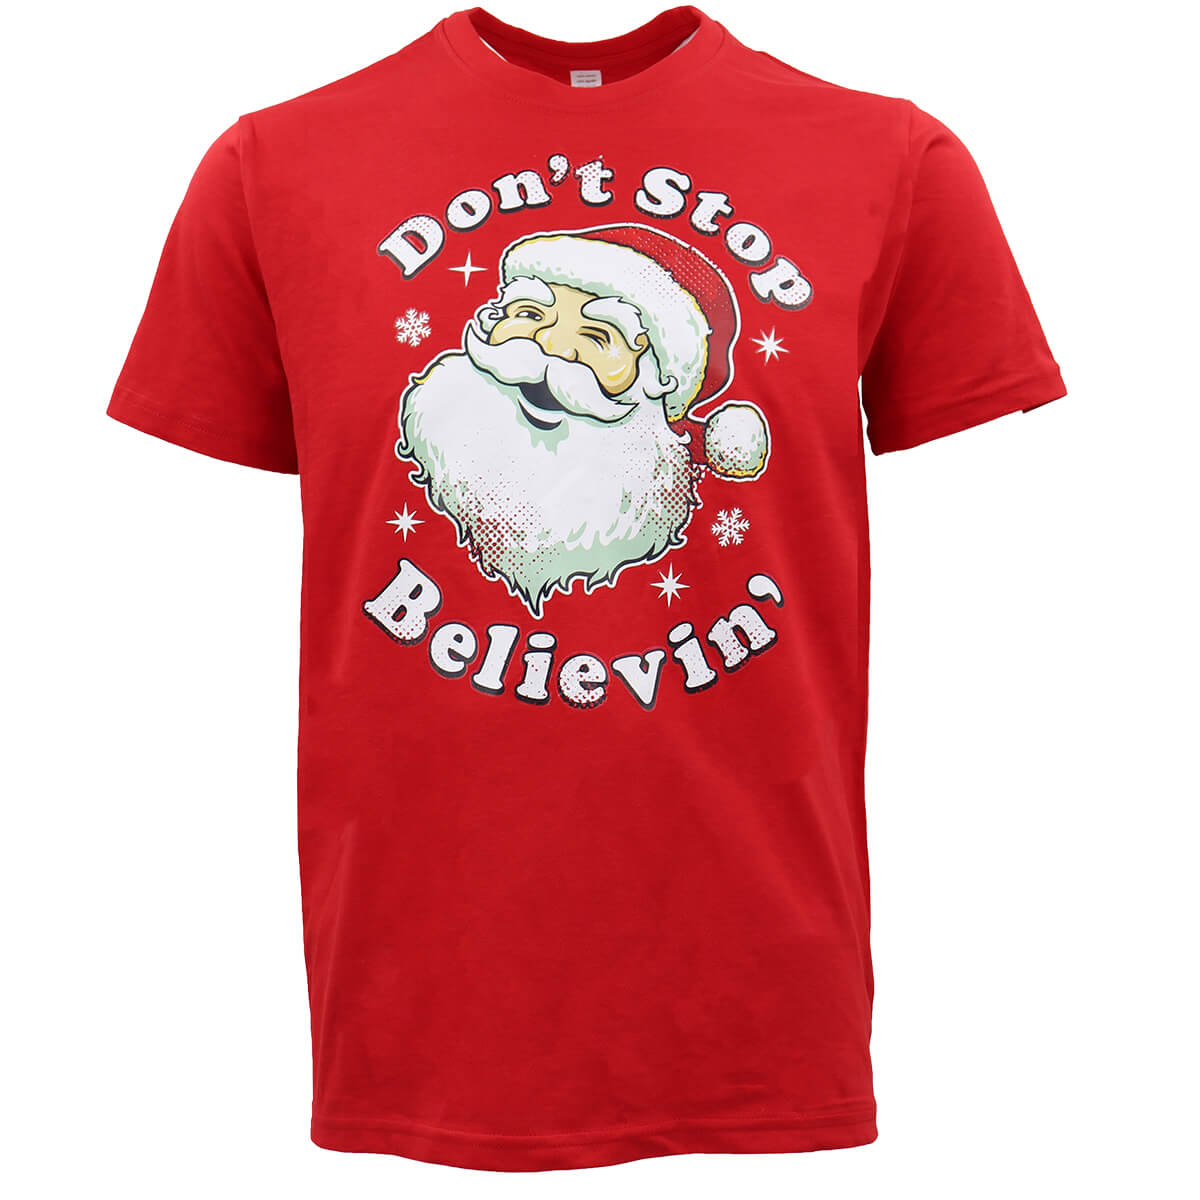 New Funny Adult Xmas Christmas T Shirt Tee Mens Womens 100% Cotton Jolly Ugly, Don't Stop Believin' (Red), M